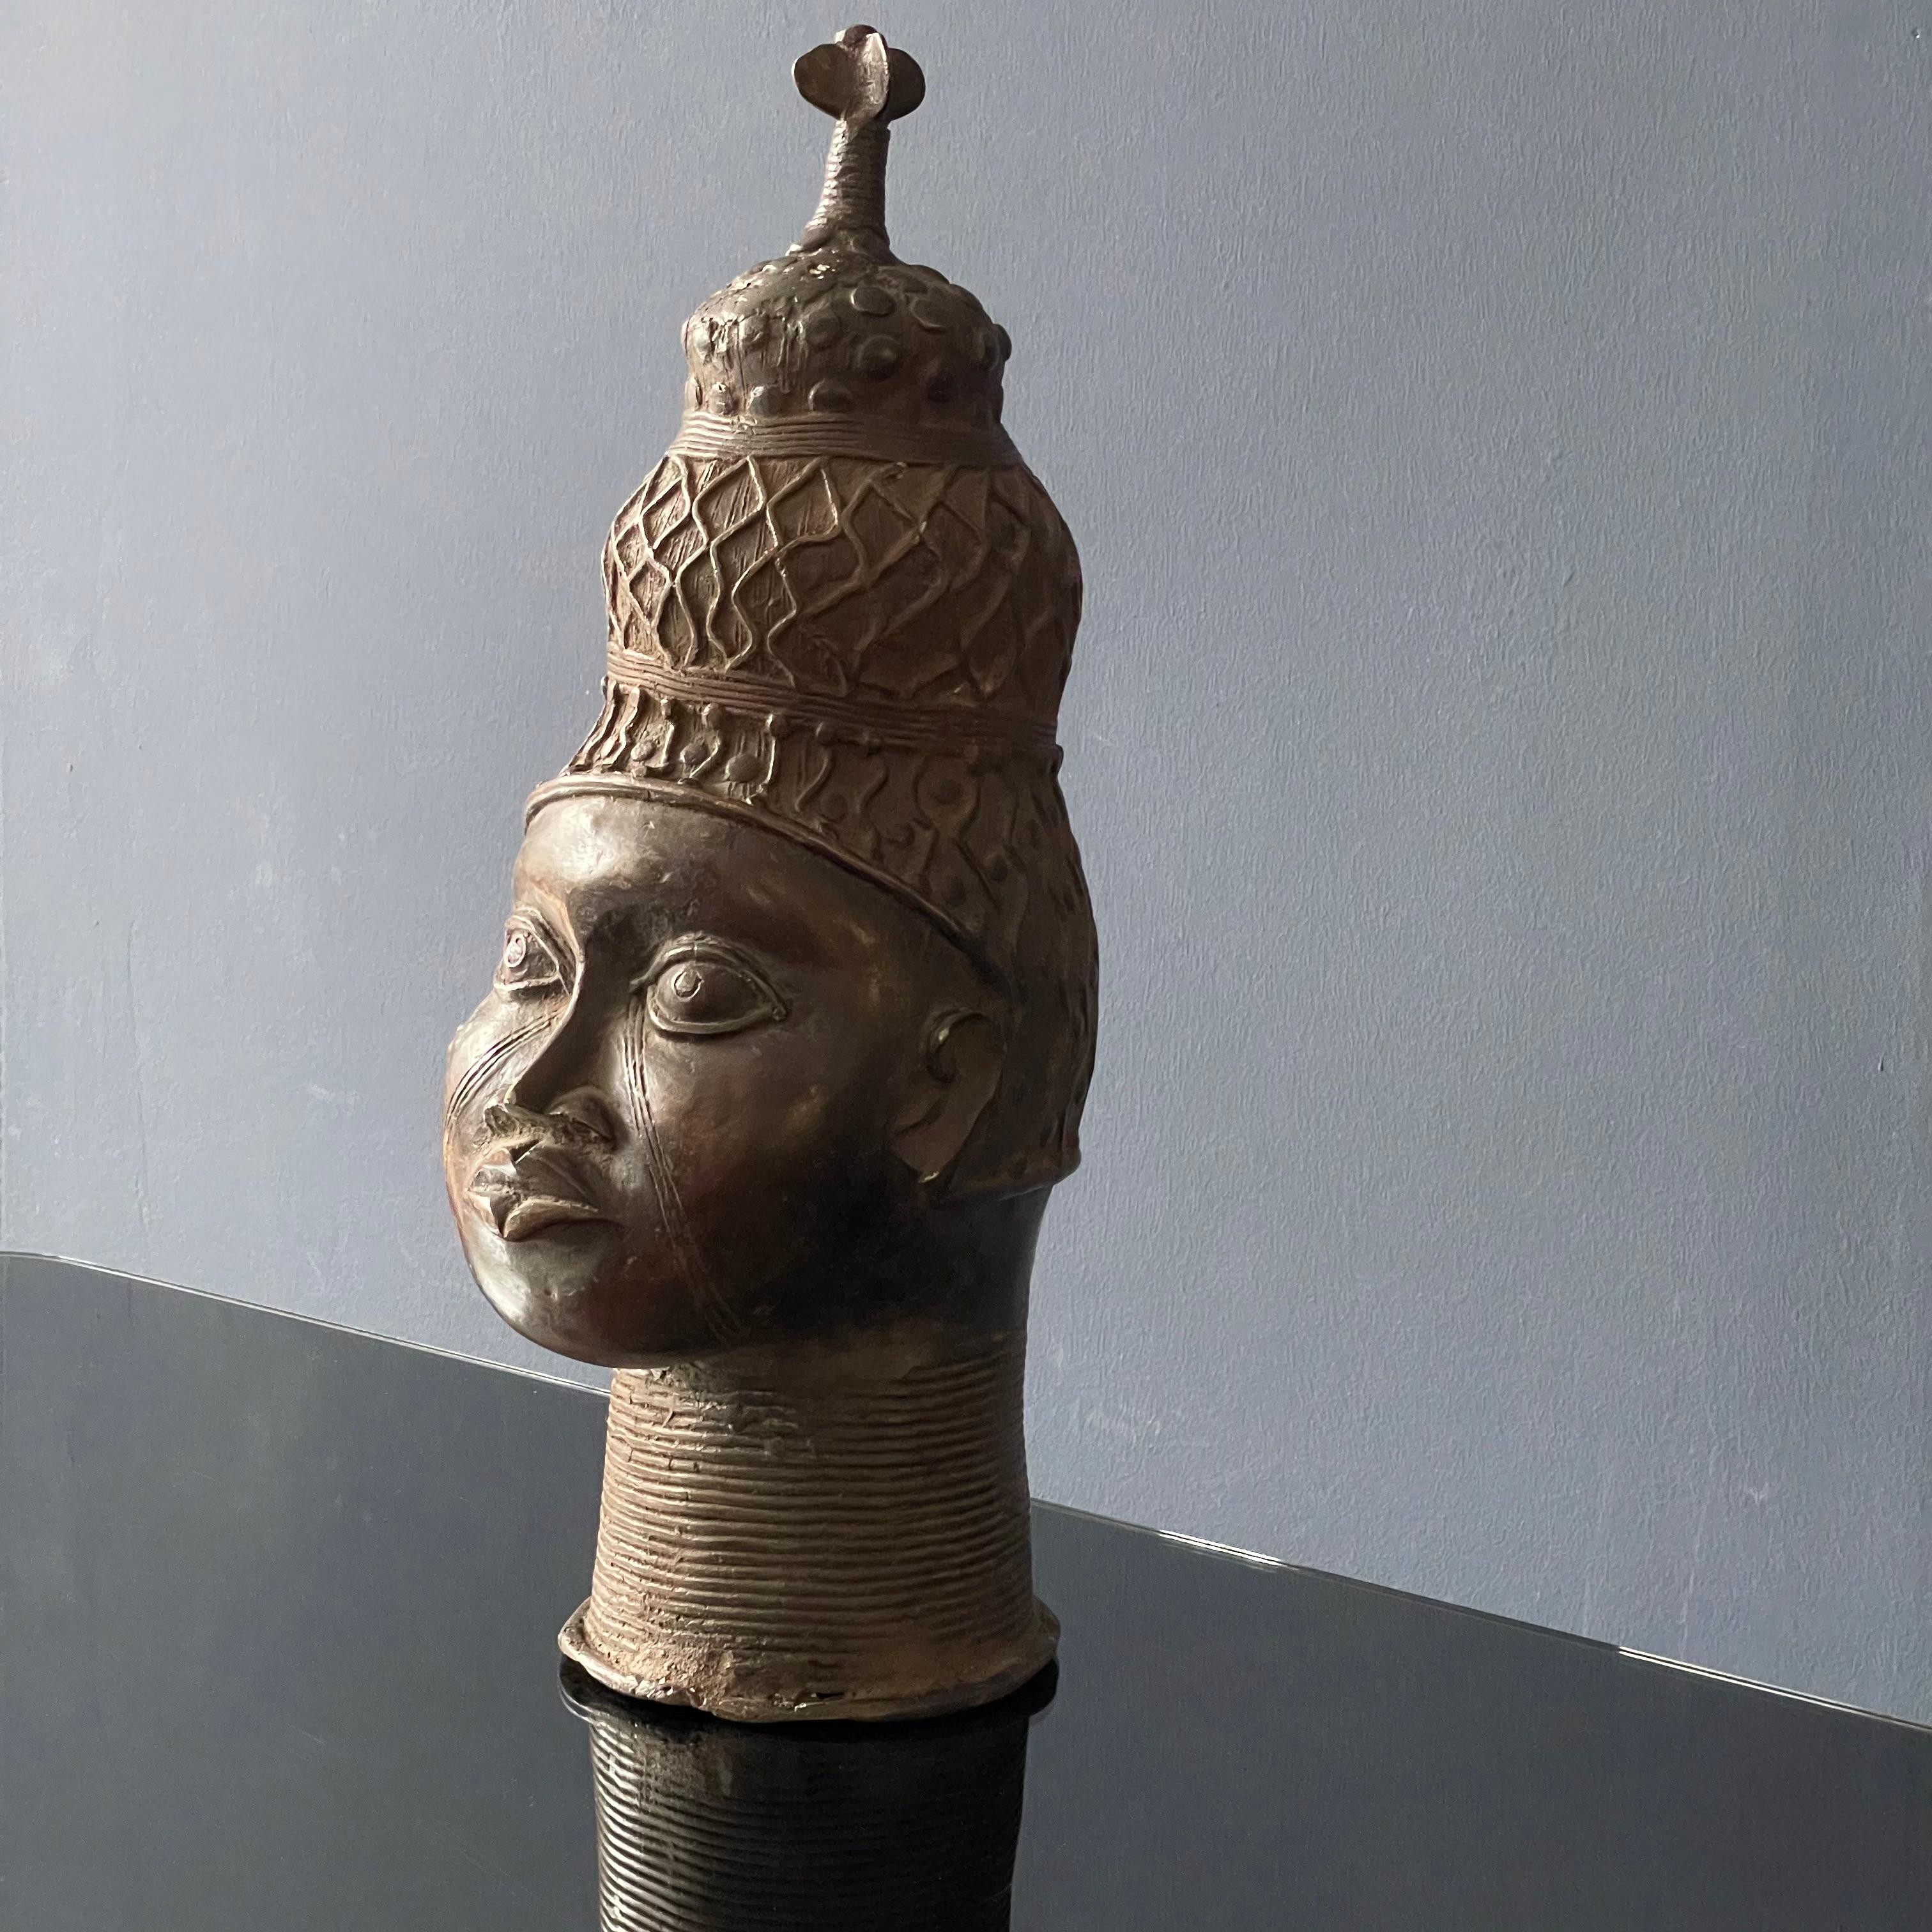 Made by the Yoruba Tribe from Benin they date back to the 19th century. Created for the royal family.